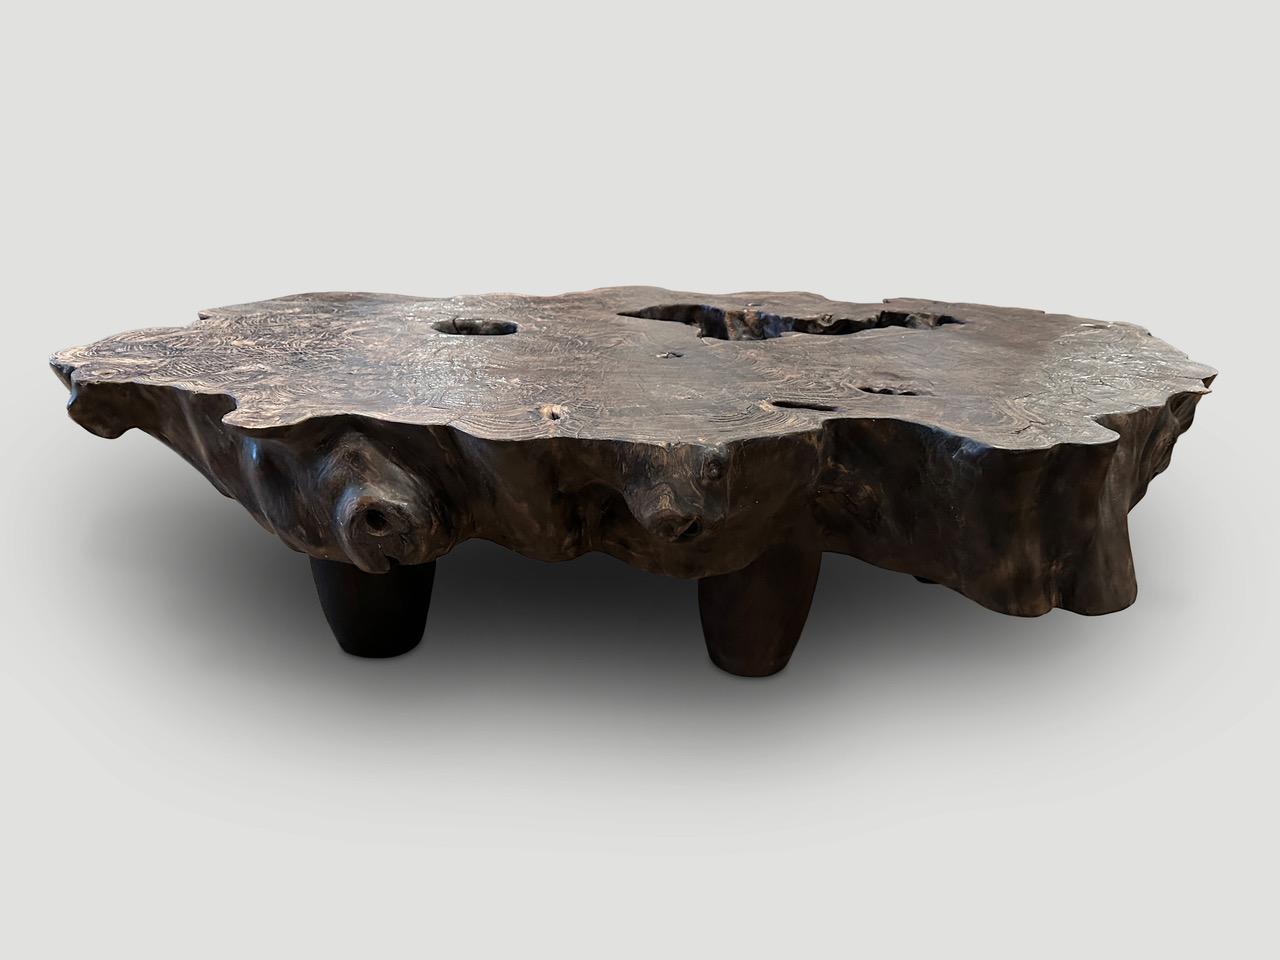 Natural organic formed reclaimed teak root coffee table. We added cone style legs and charred this impressive six inch slab lightly to a rich brown. Finally we rubbed the top with a wire brush revealing the beautiful wood grain. It’s all in the